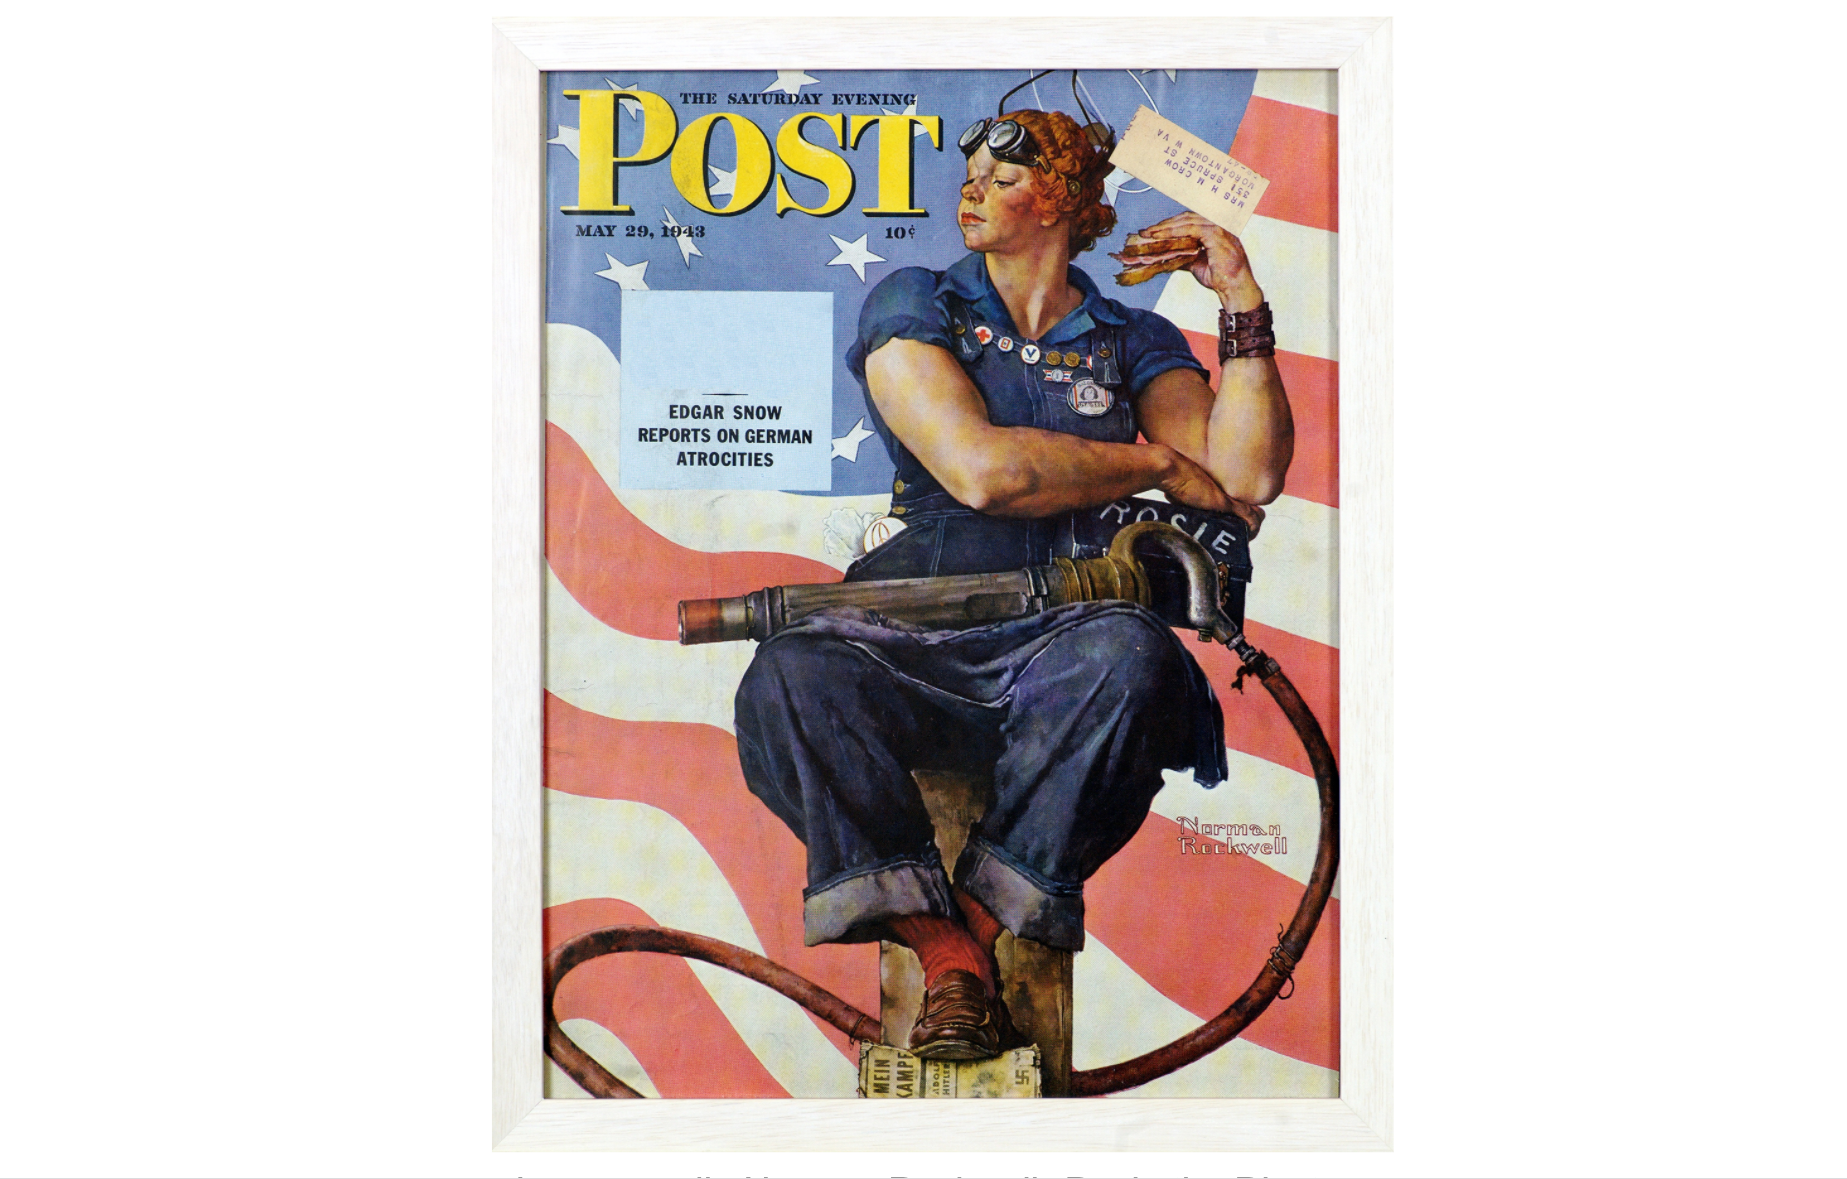 Image credit: Norman Rockwell, Rosie the Riveter.   Cover illustration for The Saturday Evening Post, May 29, 1943.   Norman Rockwell Museum ©1943 SEPS: Curtis Publishing, Indianapolis, IN.